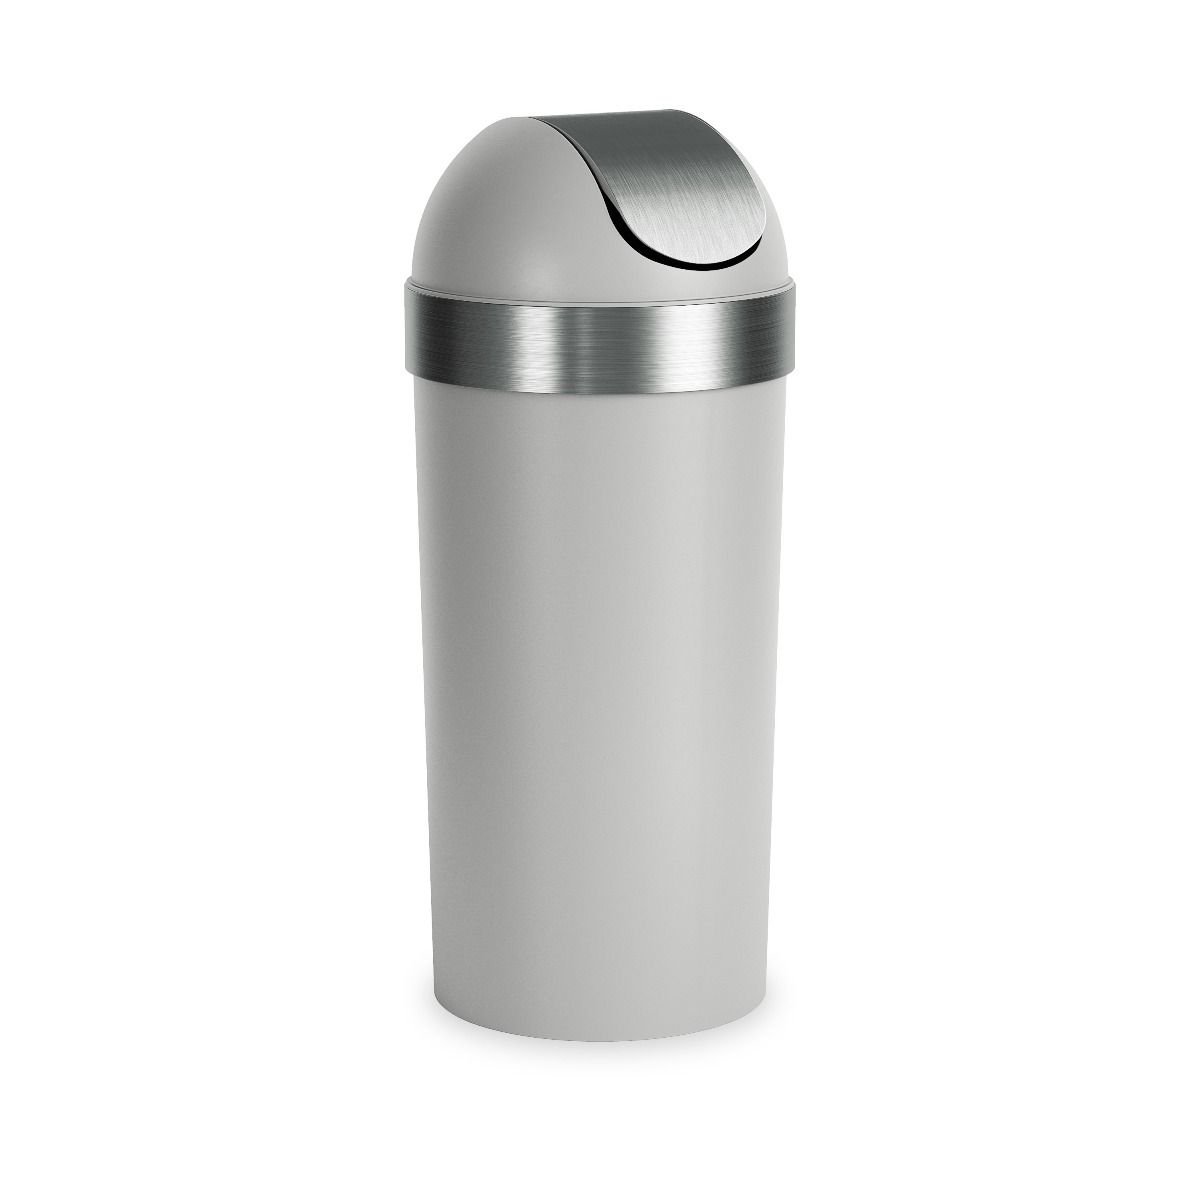 OGGI Co. Stainless Steel Mini Trash Can Organizer, Canister, Dome